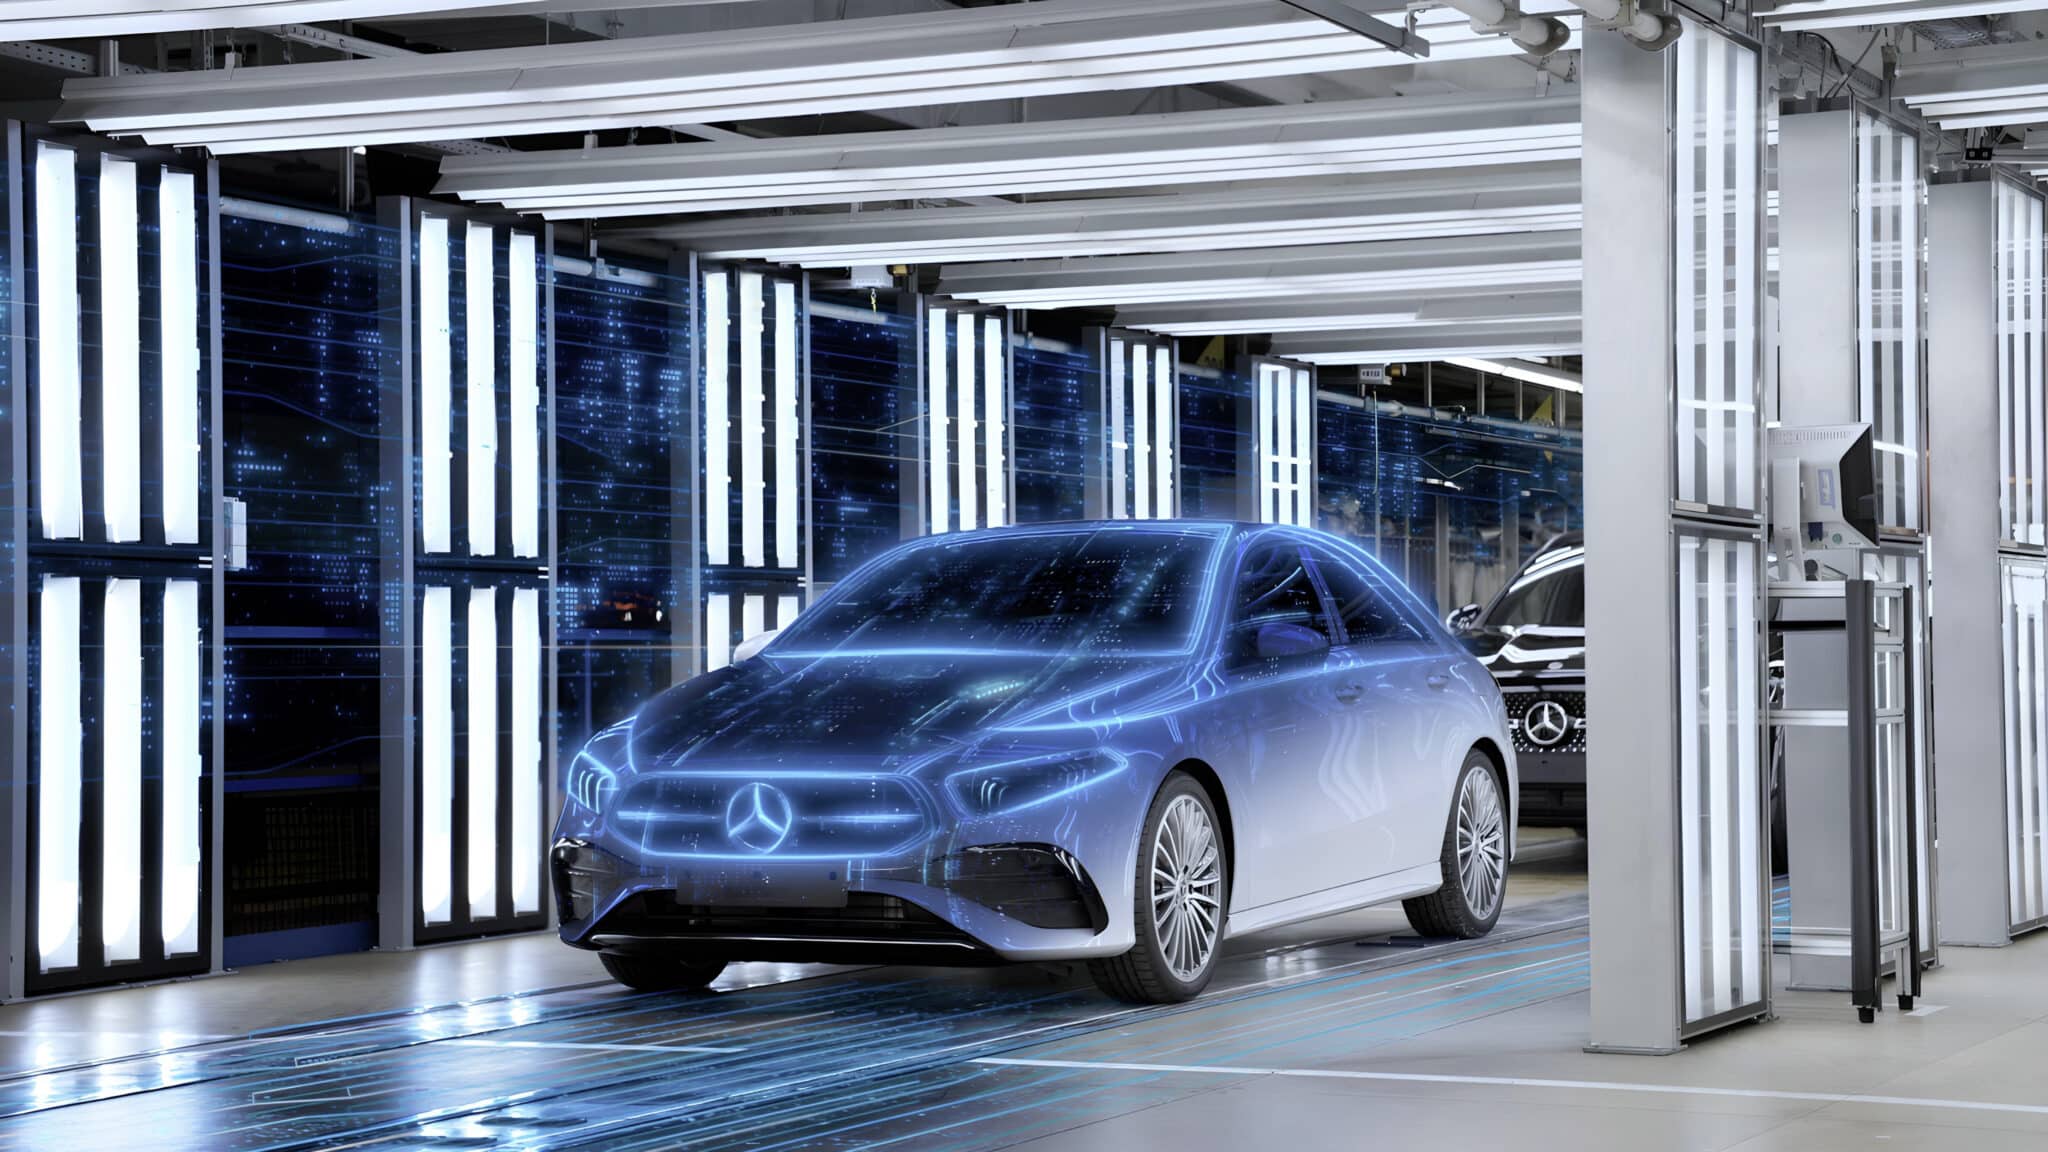 Virtually Incredible: Mercedes-Benz Folds Next-Gen Luxury EV Platform Into Production With NVIDIA Omniverse and Generative AI